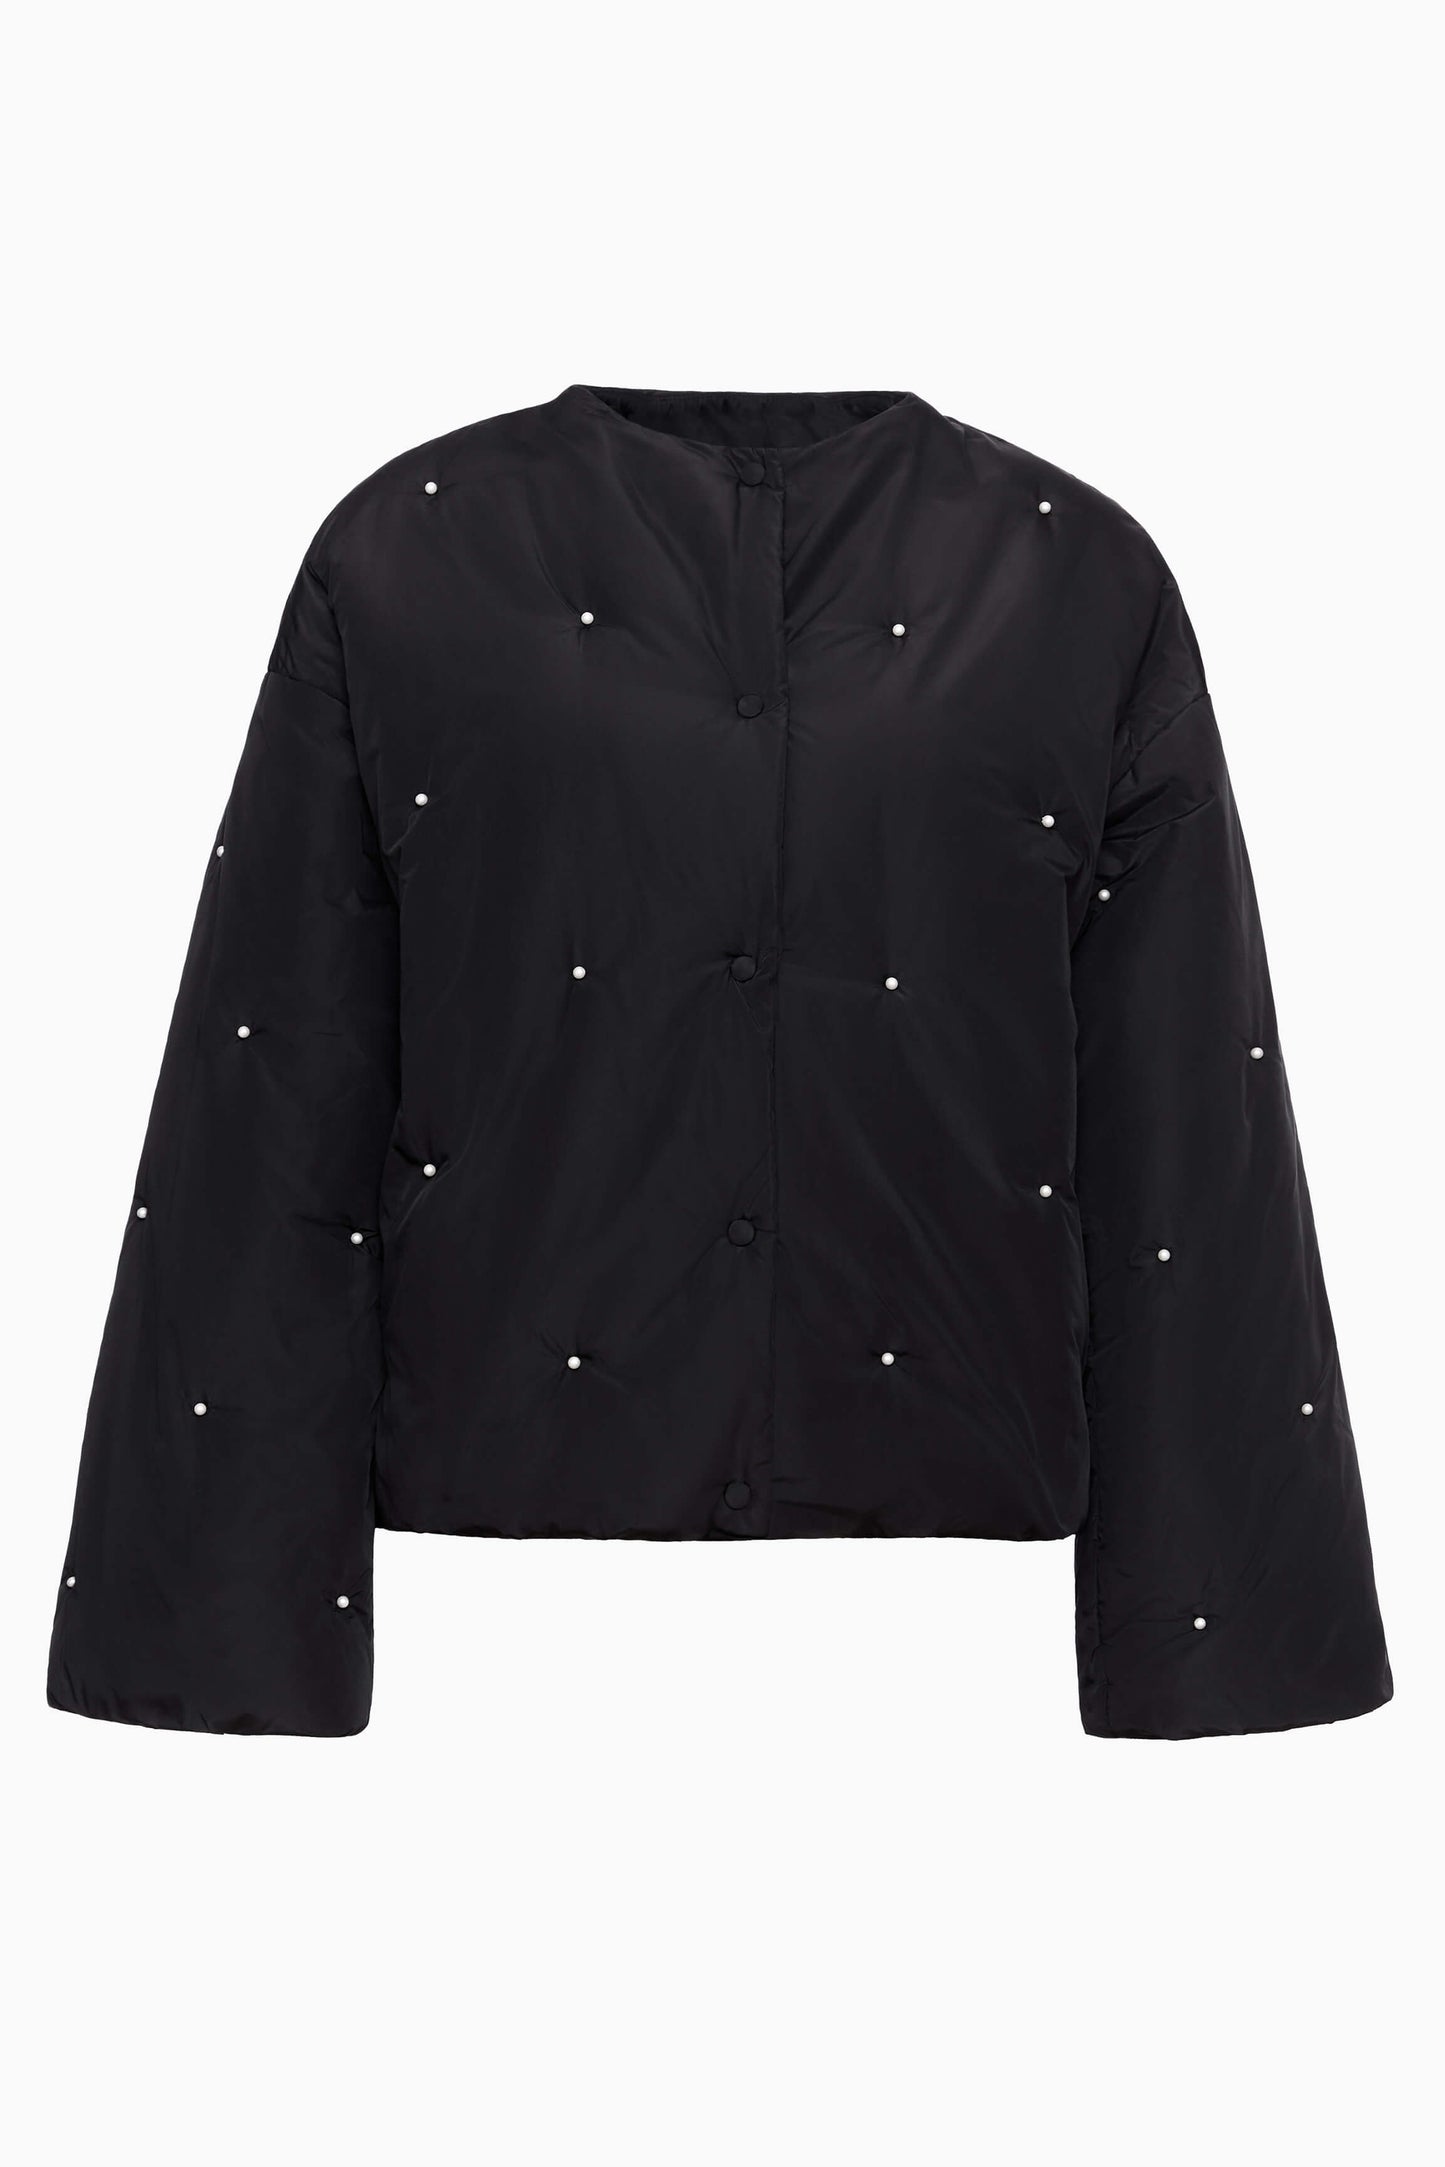 Puffer Jacket in Black with Pearl details